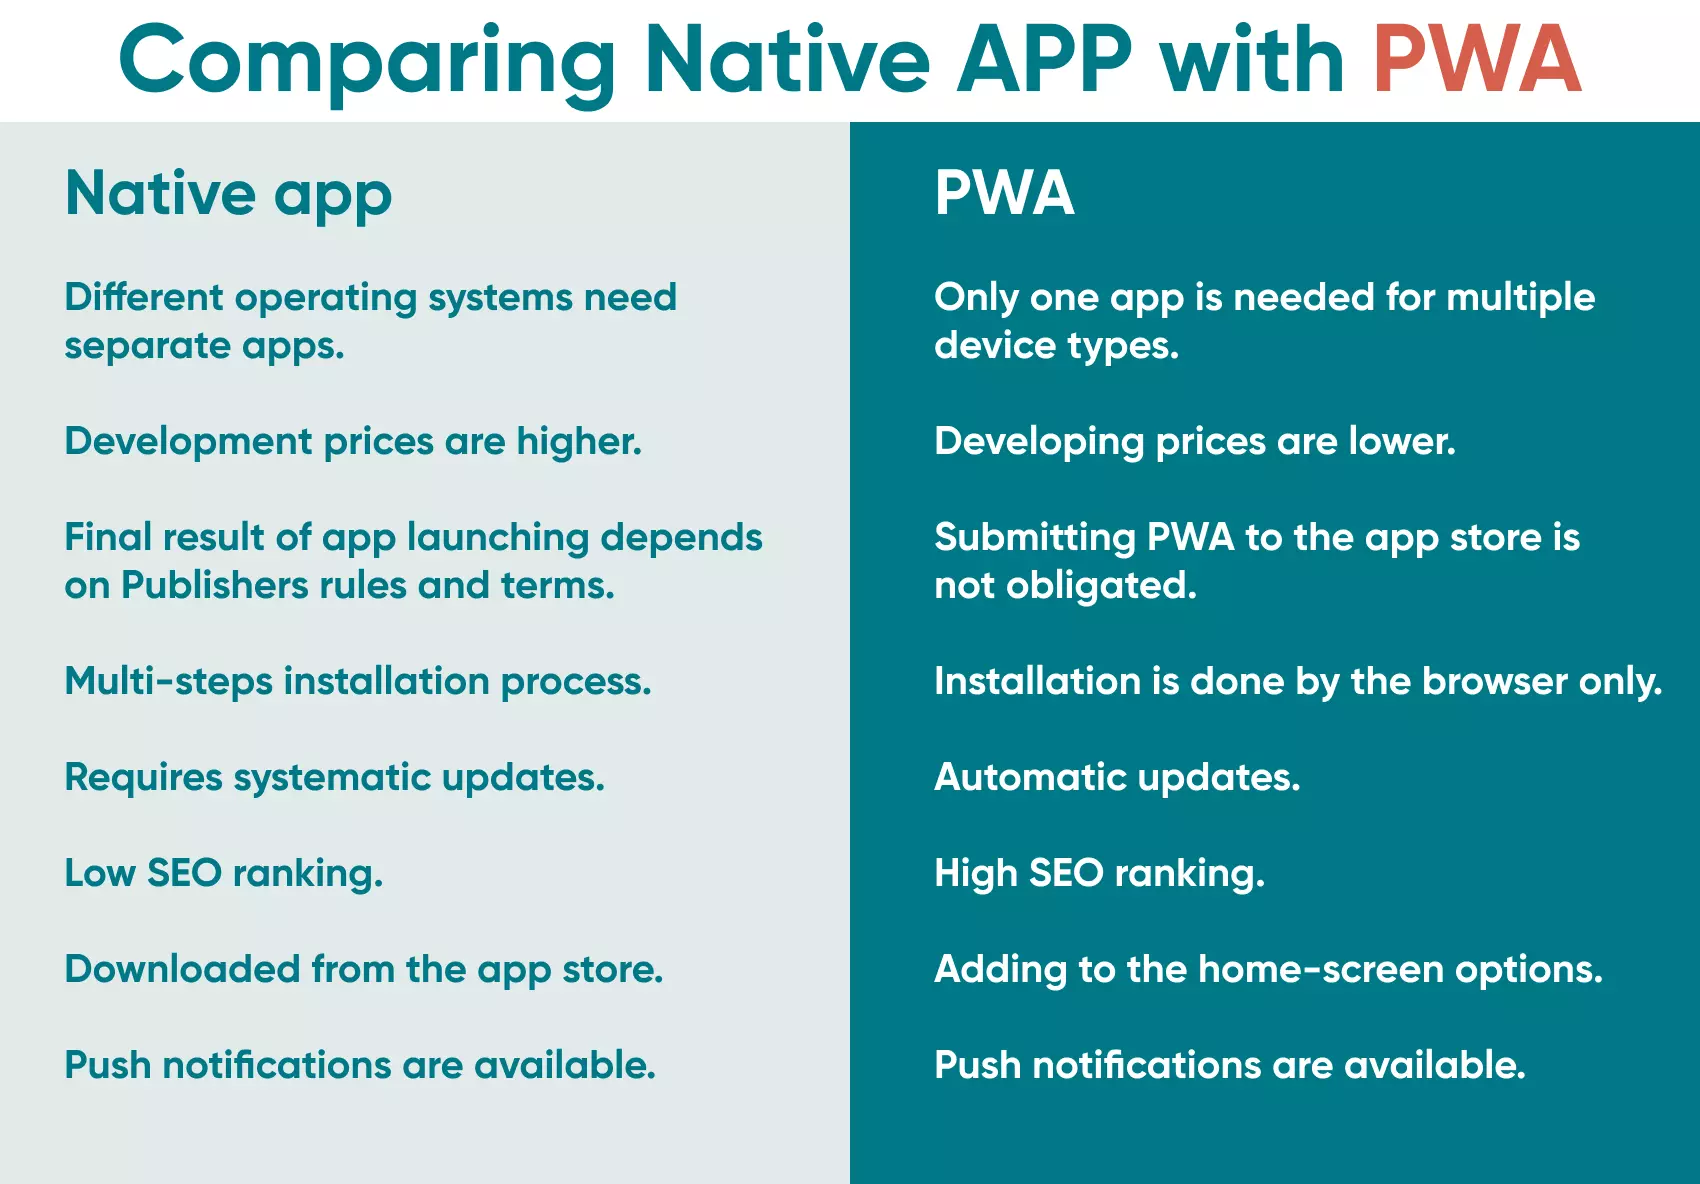 It is often easier to comapre services or products prior to buying for the sake of time and effort. Discover some of the comparisons between native apps and pwa.